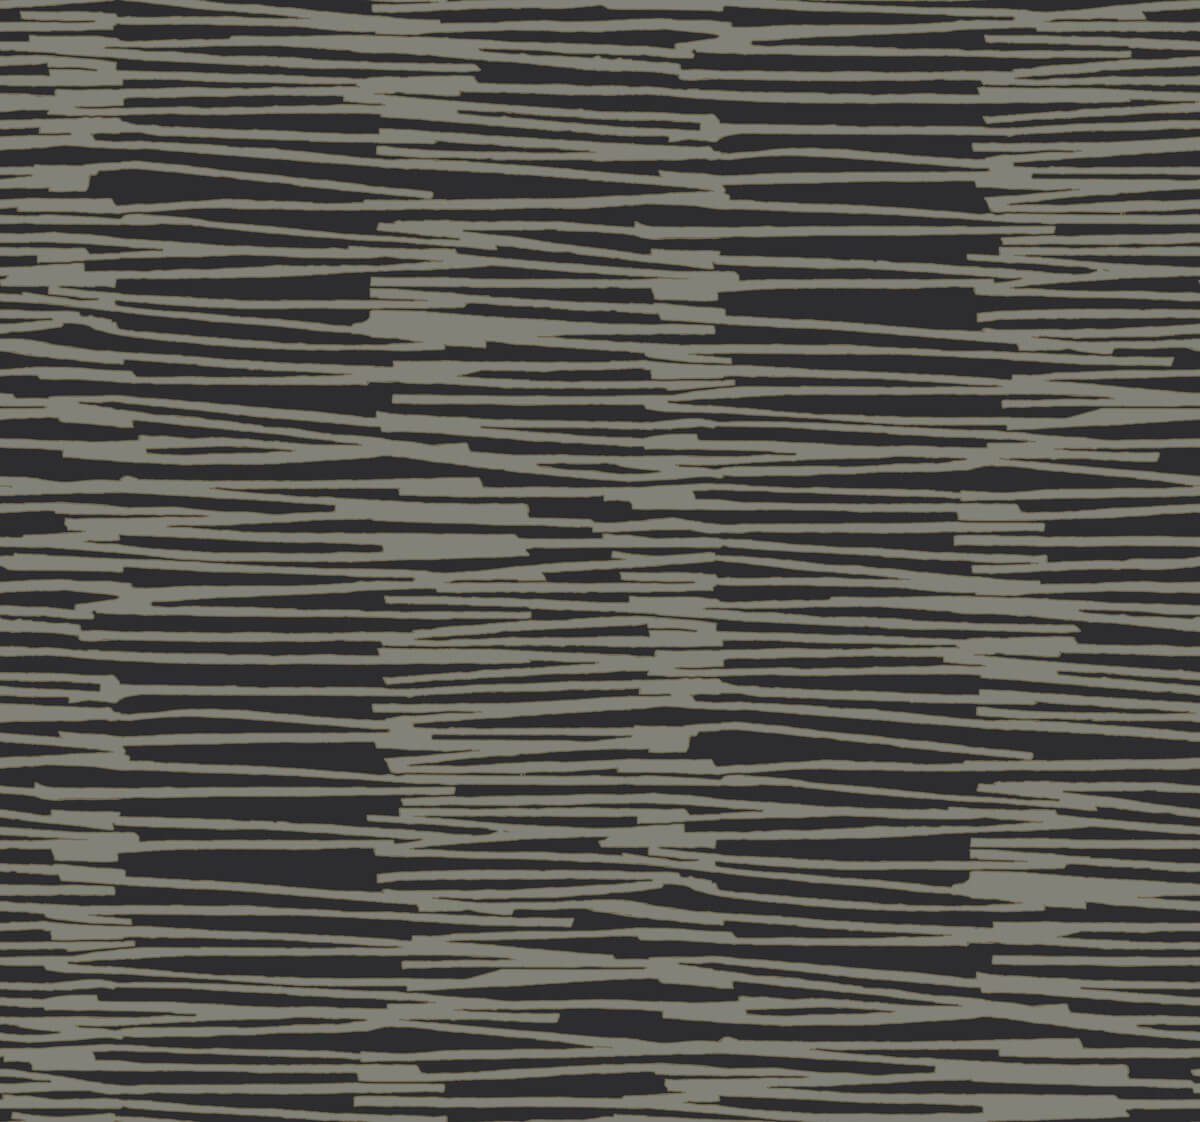 Artistic Abstracts Water Reed Thatch Wallpaper - Black